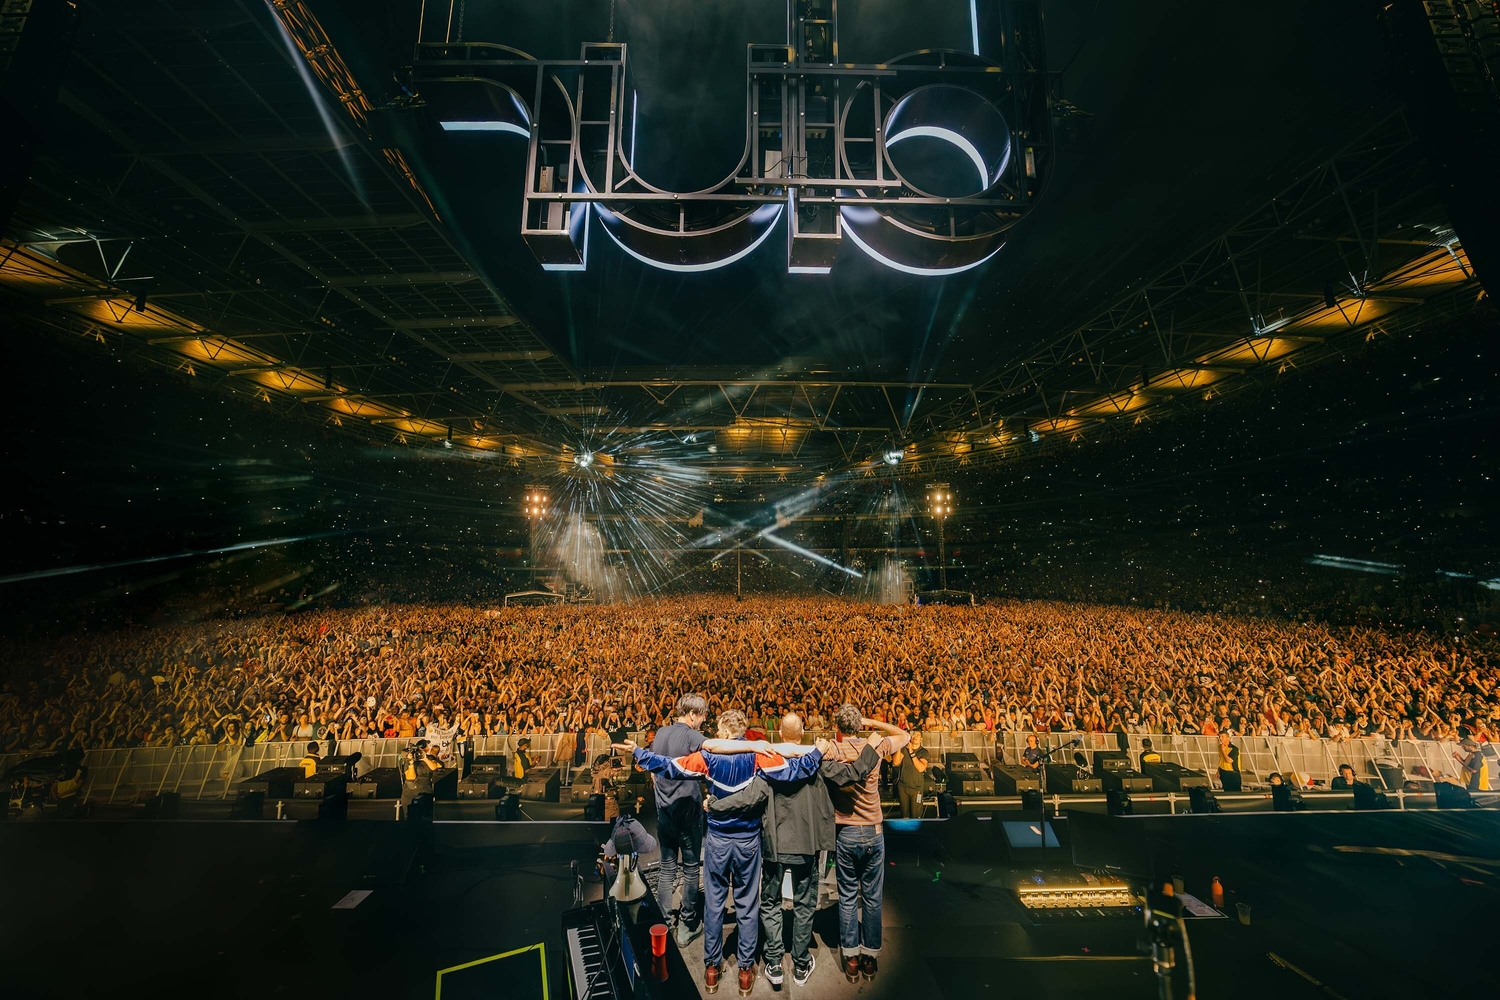 Blur to mark one year anniversary of Wembley shows with new live album